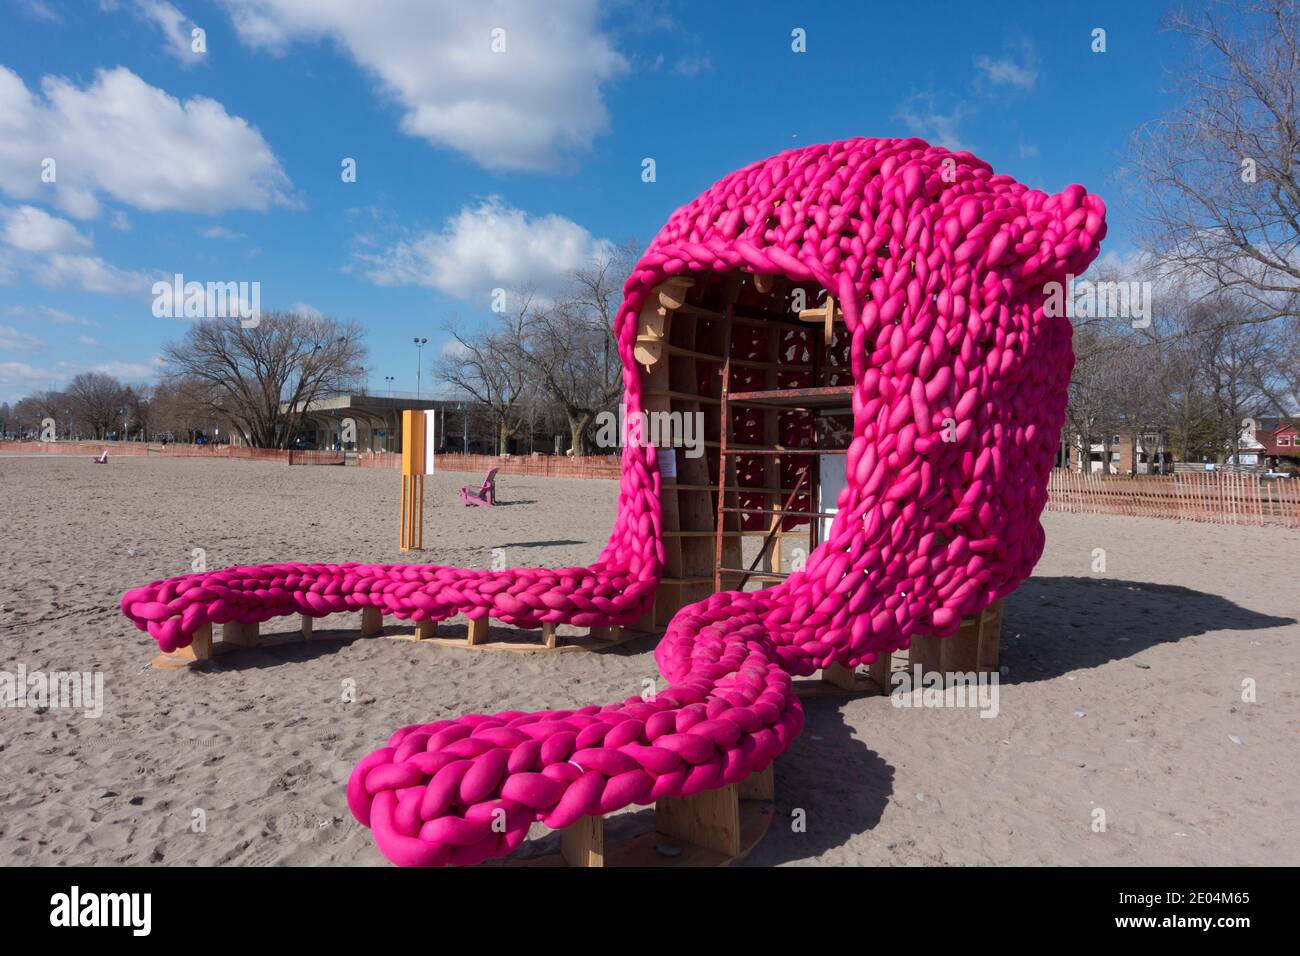 A sculpture entitled 'Pussy Hut created in protest to a controversial 2016 Trump comment at the annual winter beach art competition in Toronto Canada Stock Photo